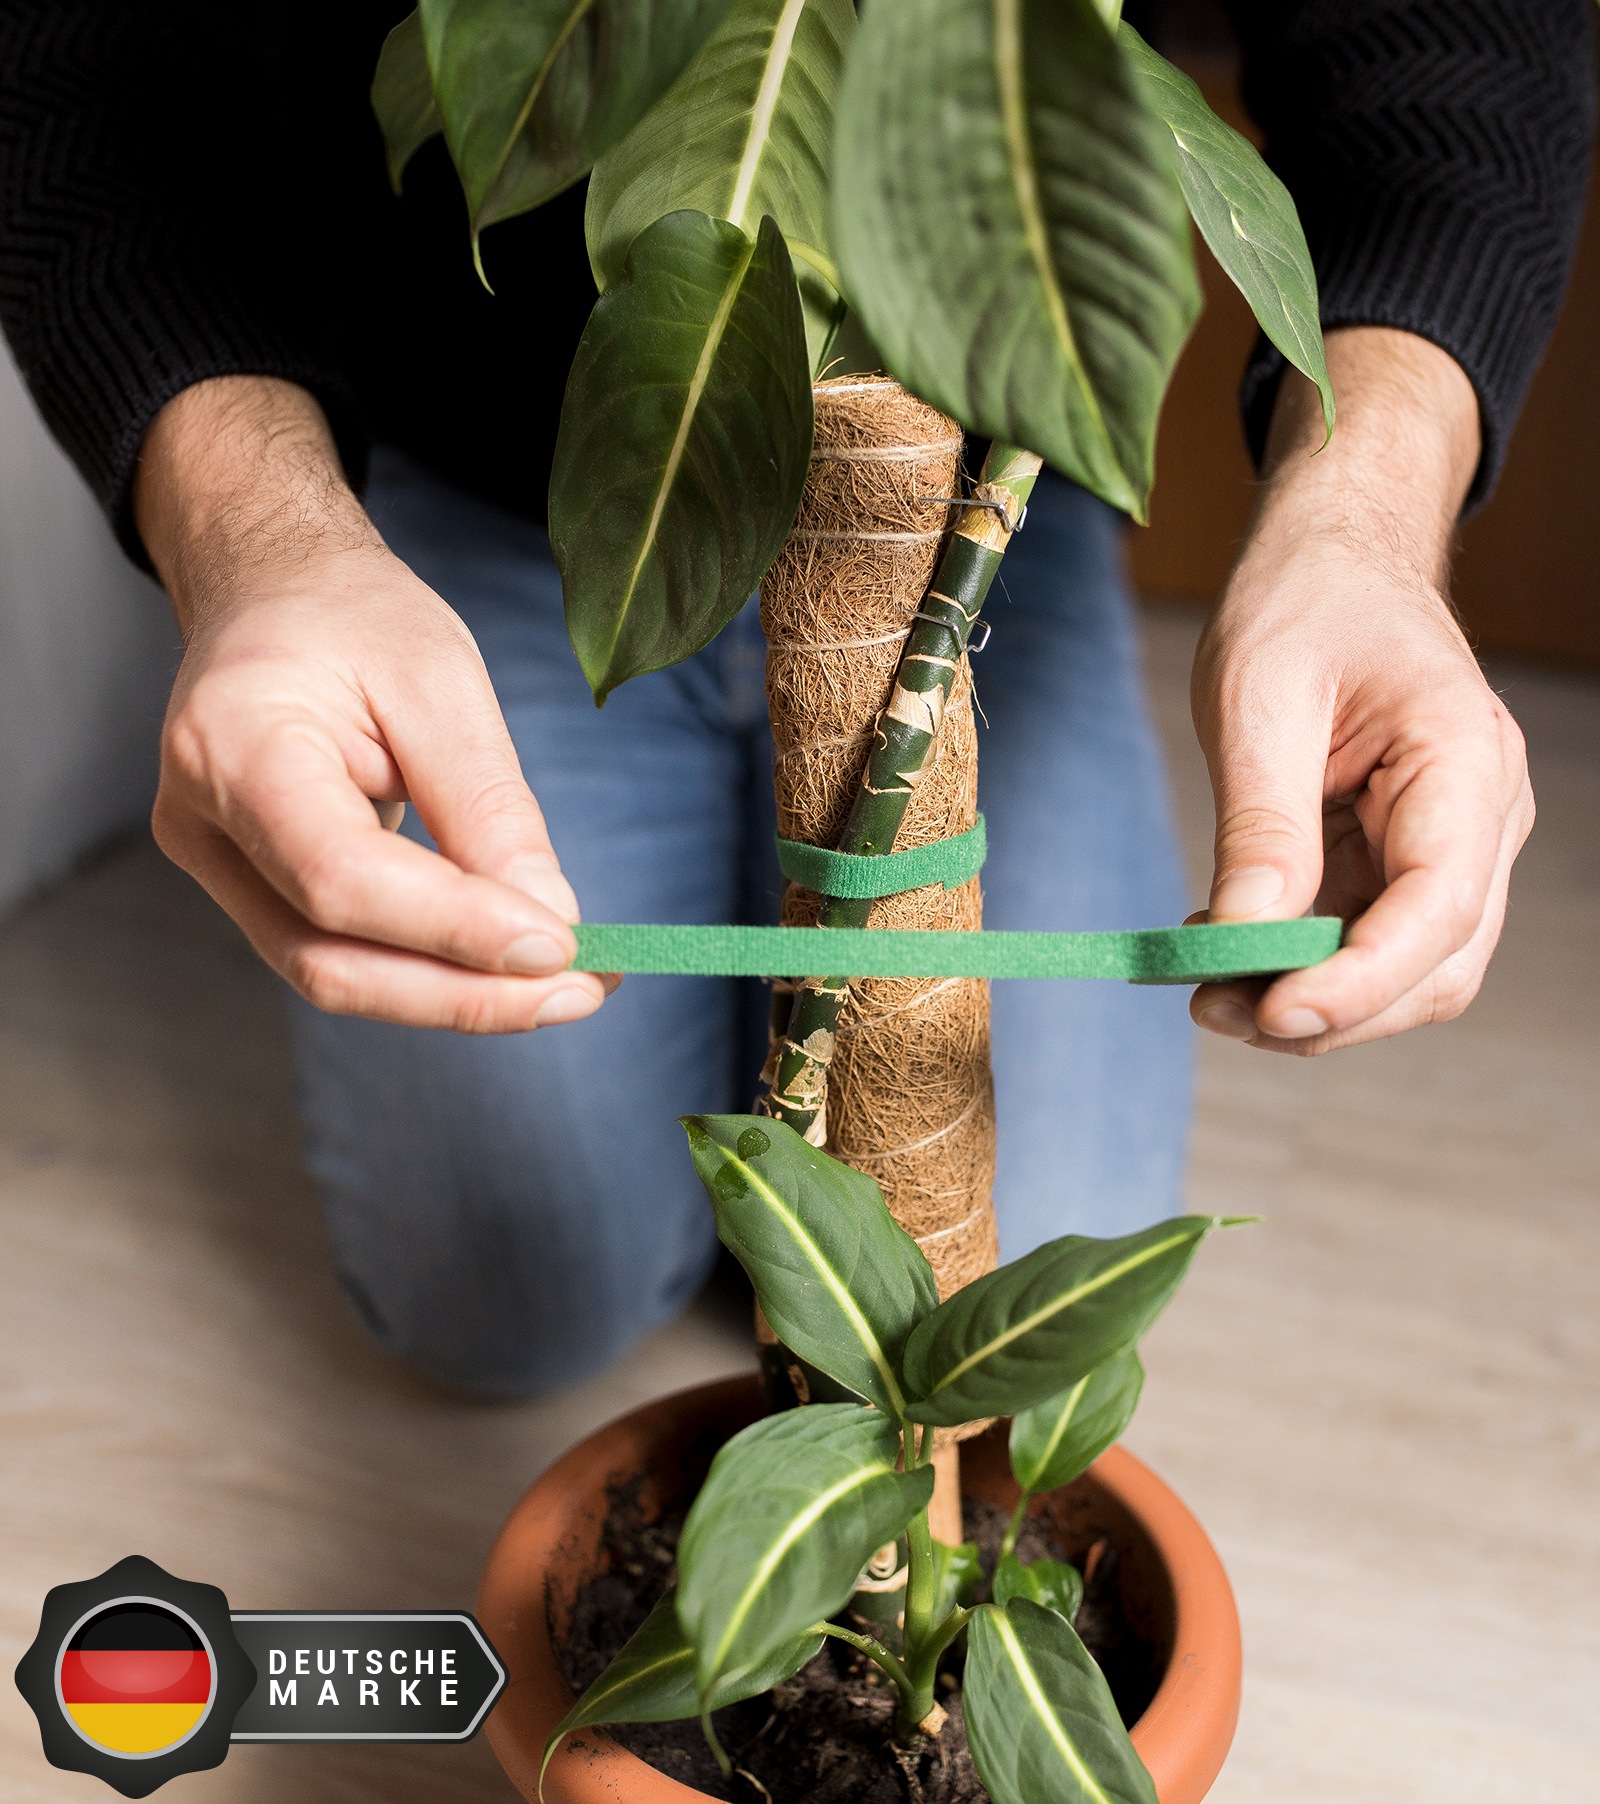 The winning image from a PickFu poll, showing plant tape being secured to a plant 